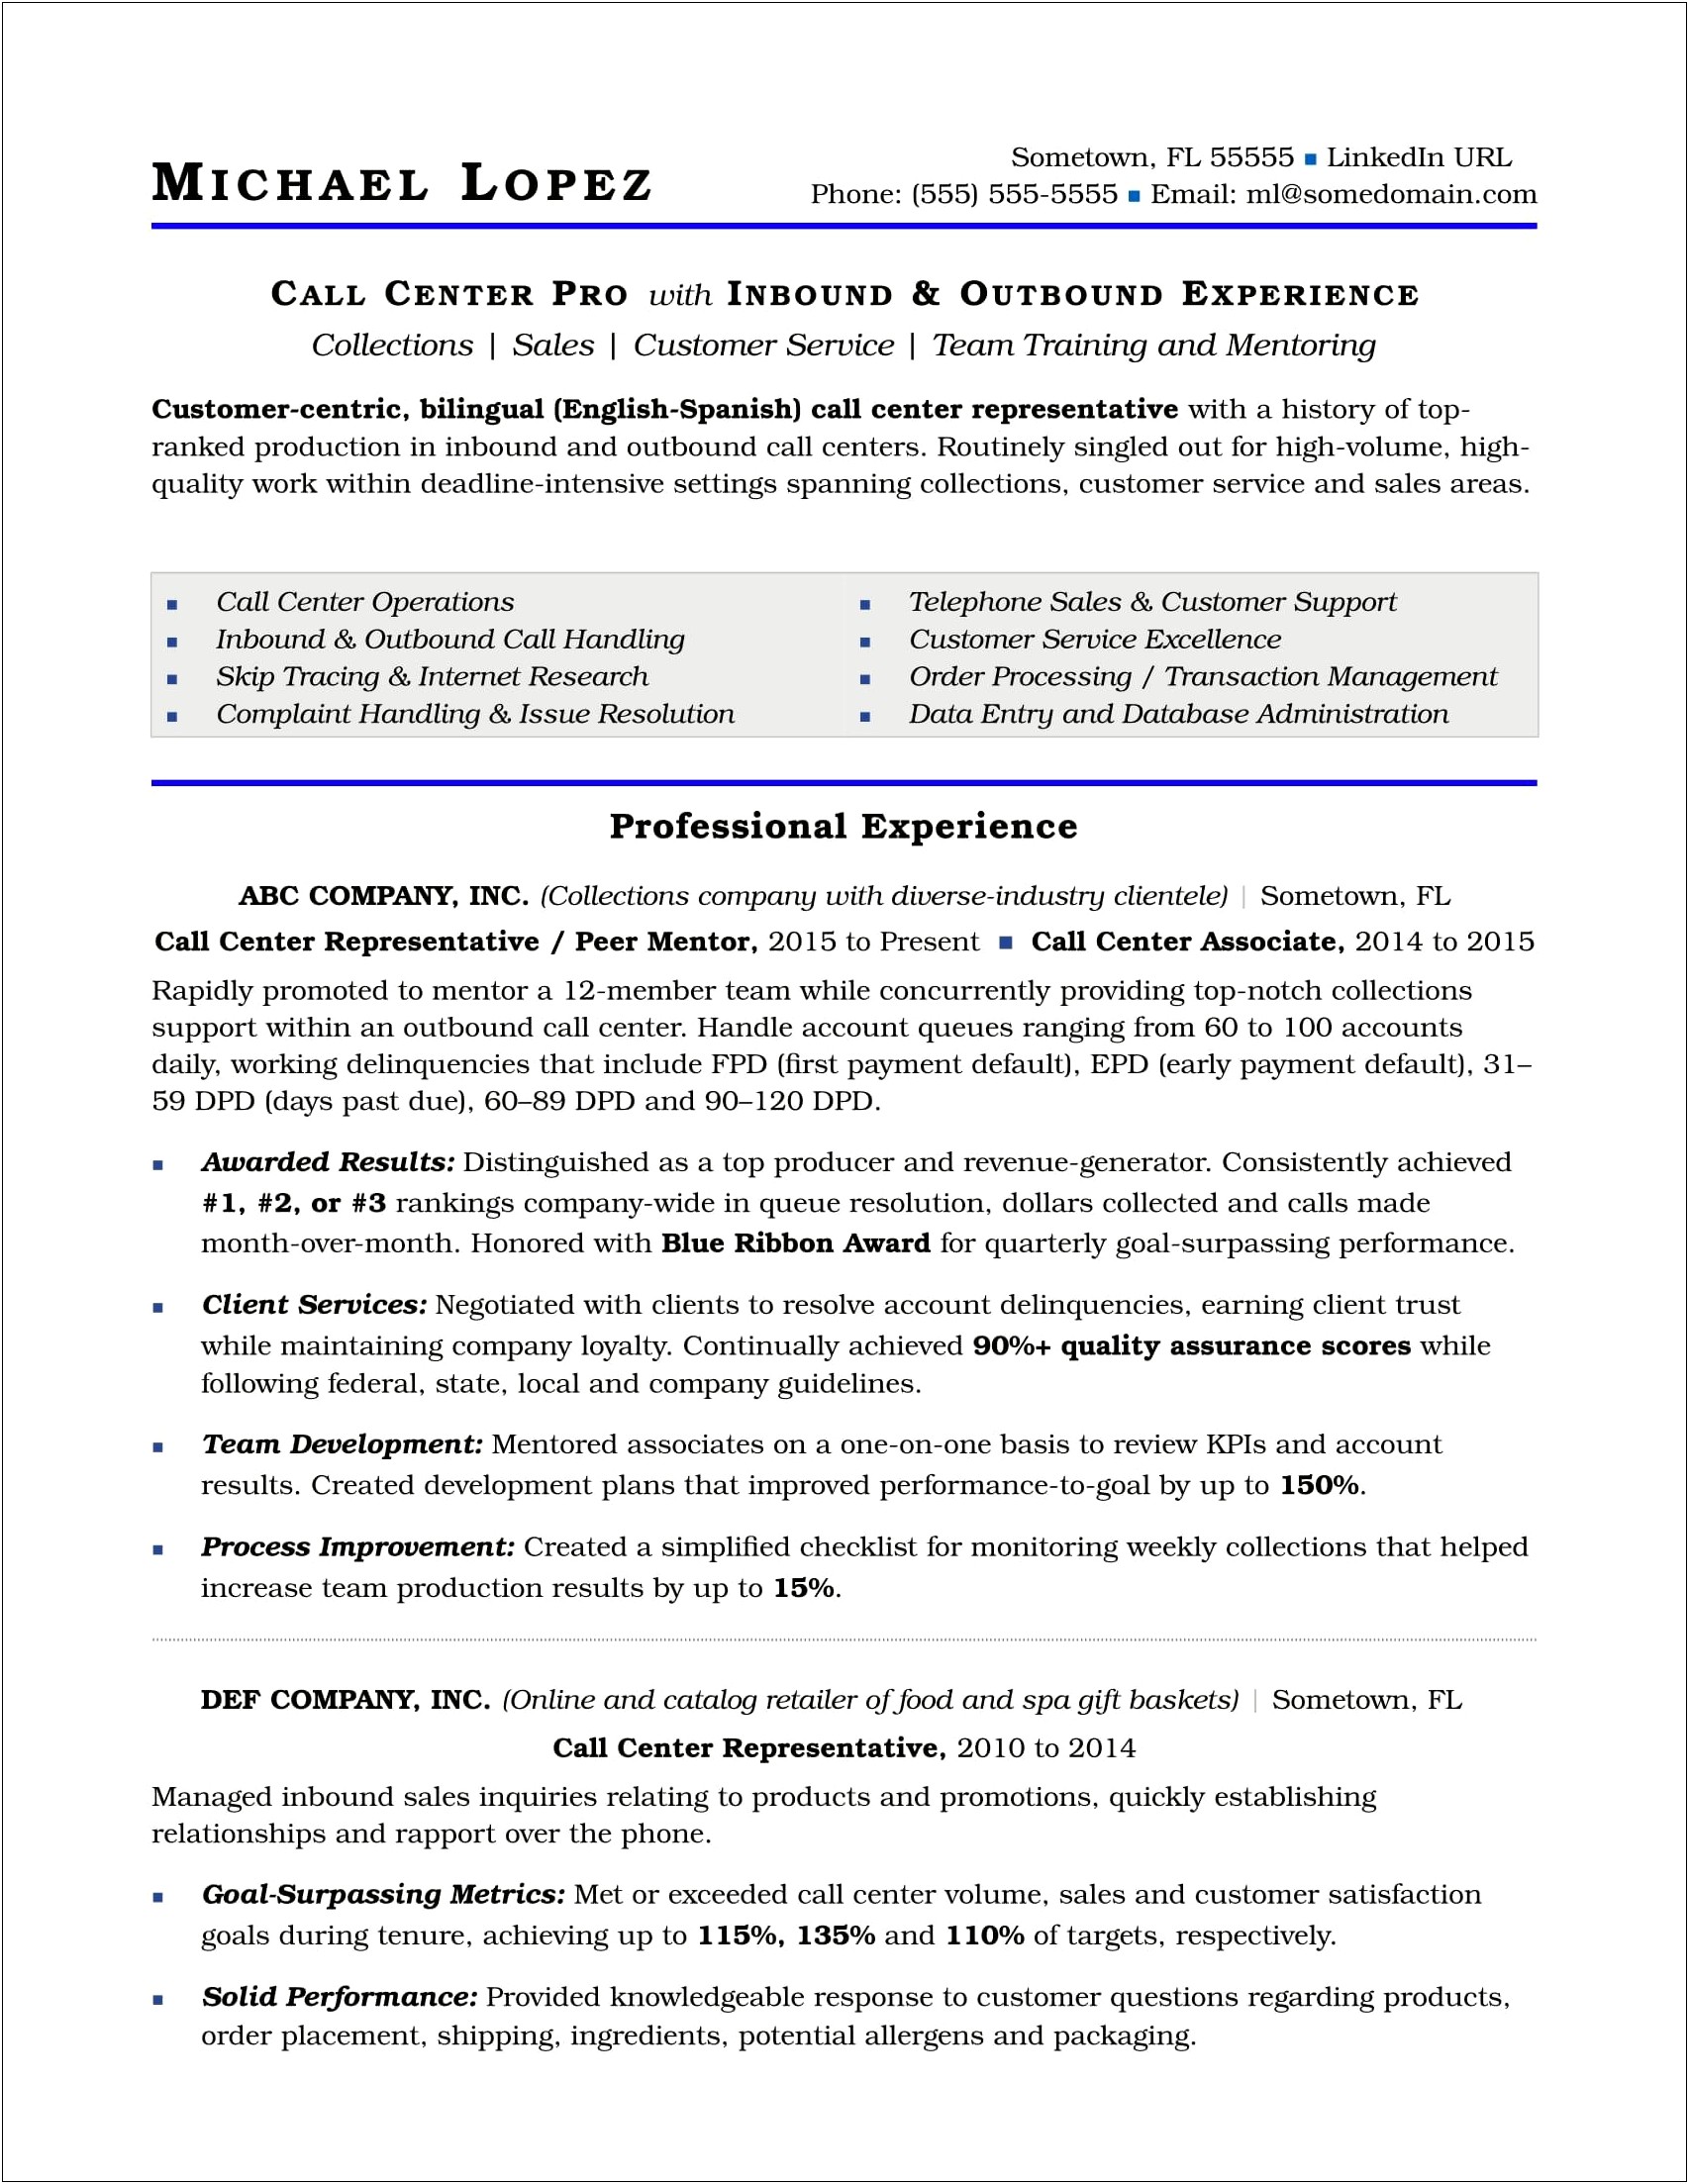 Resume Objective Manufacturing Customer Service